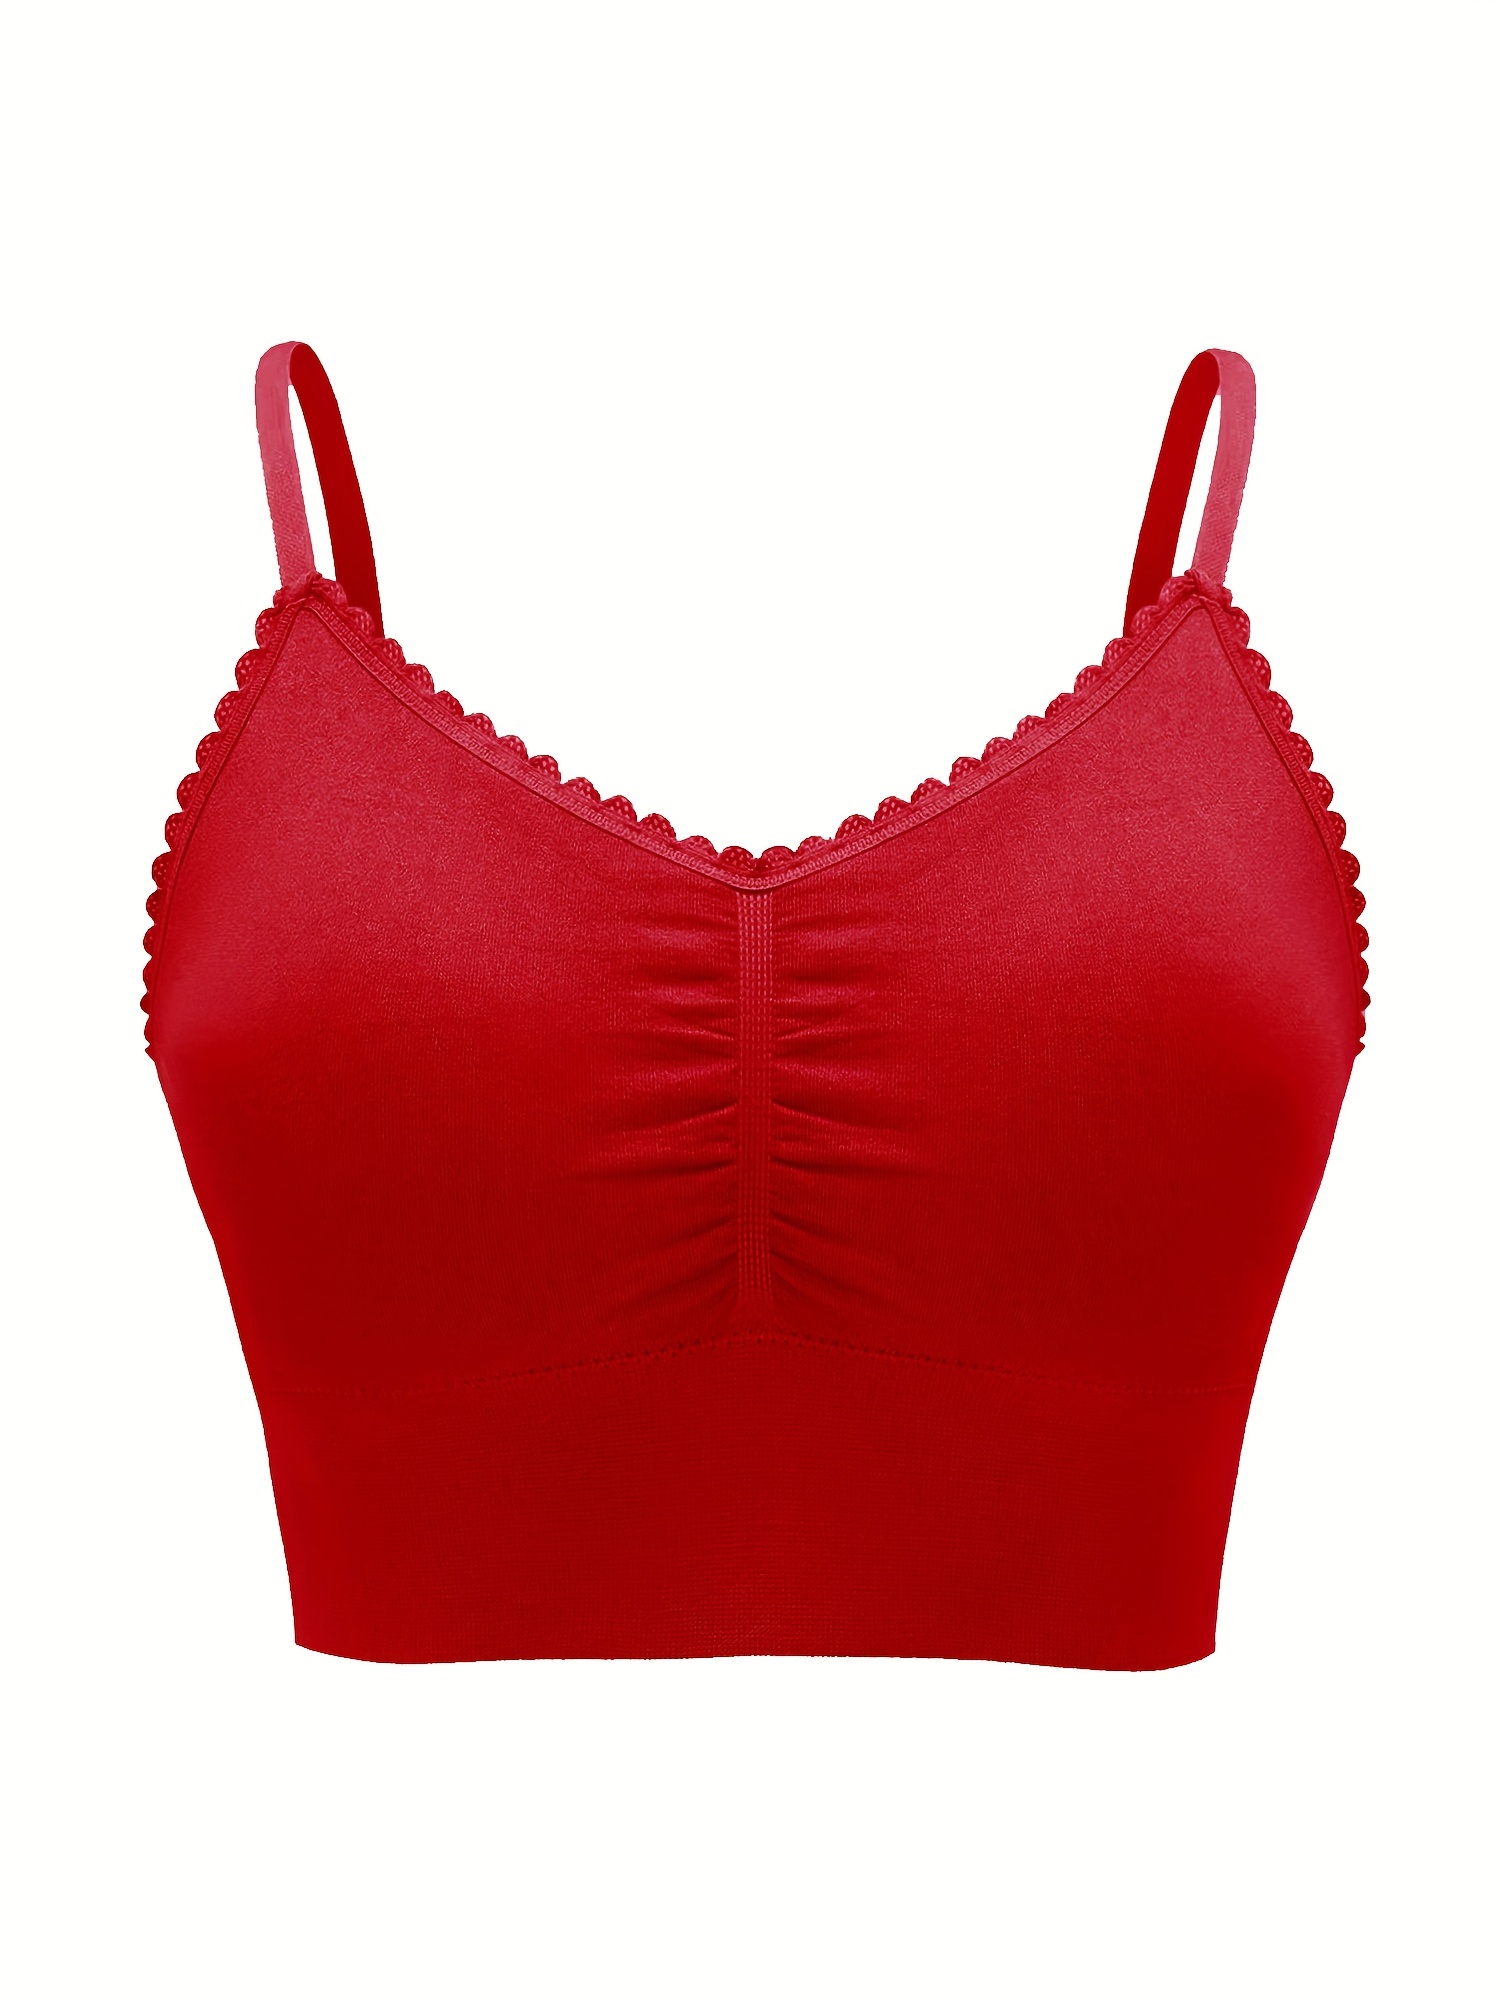  Womens Sports Bra Front Adjustable High Impact Support  Padded Wireless Racerback Plus Size Running Bra Tomato Red 32F